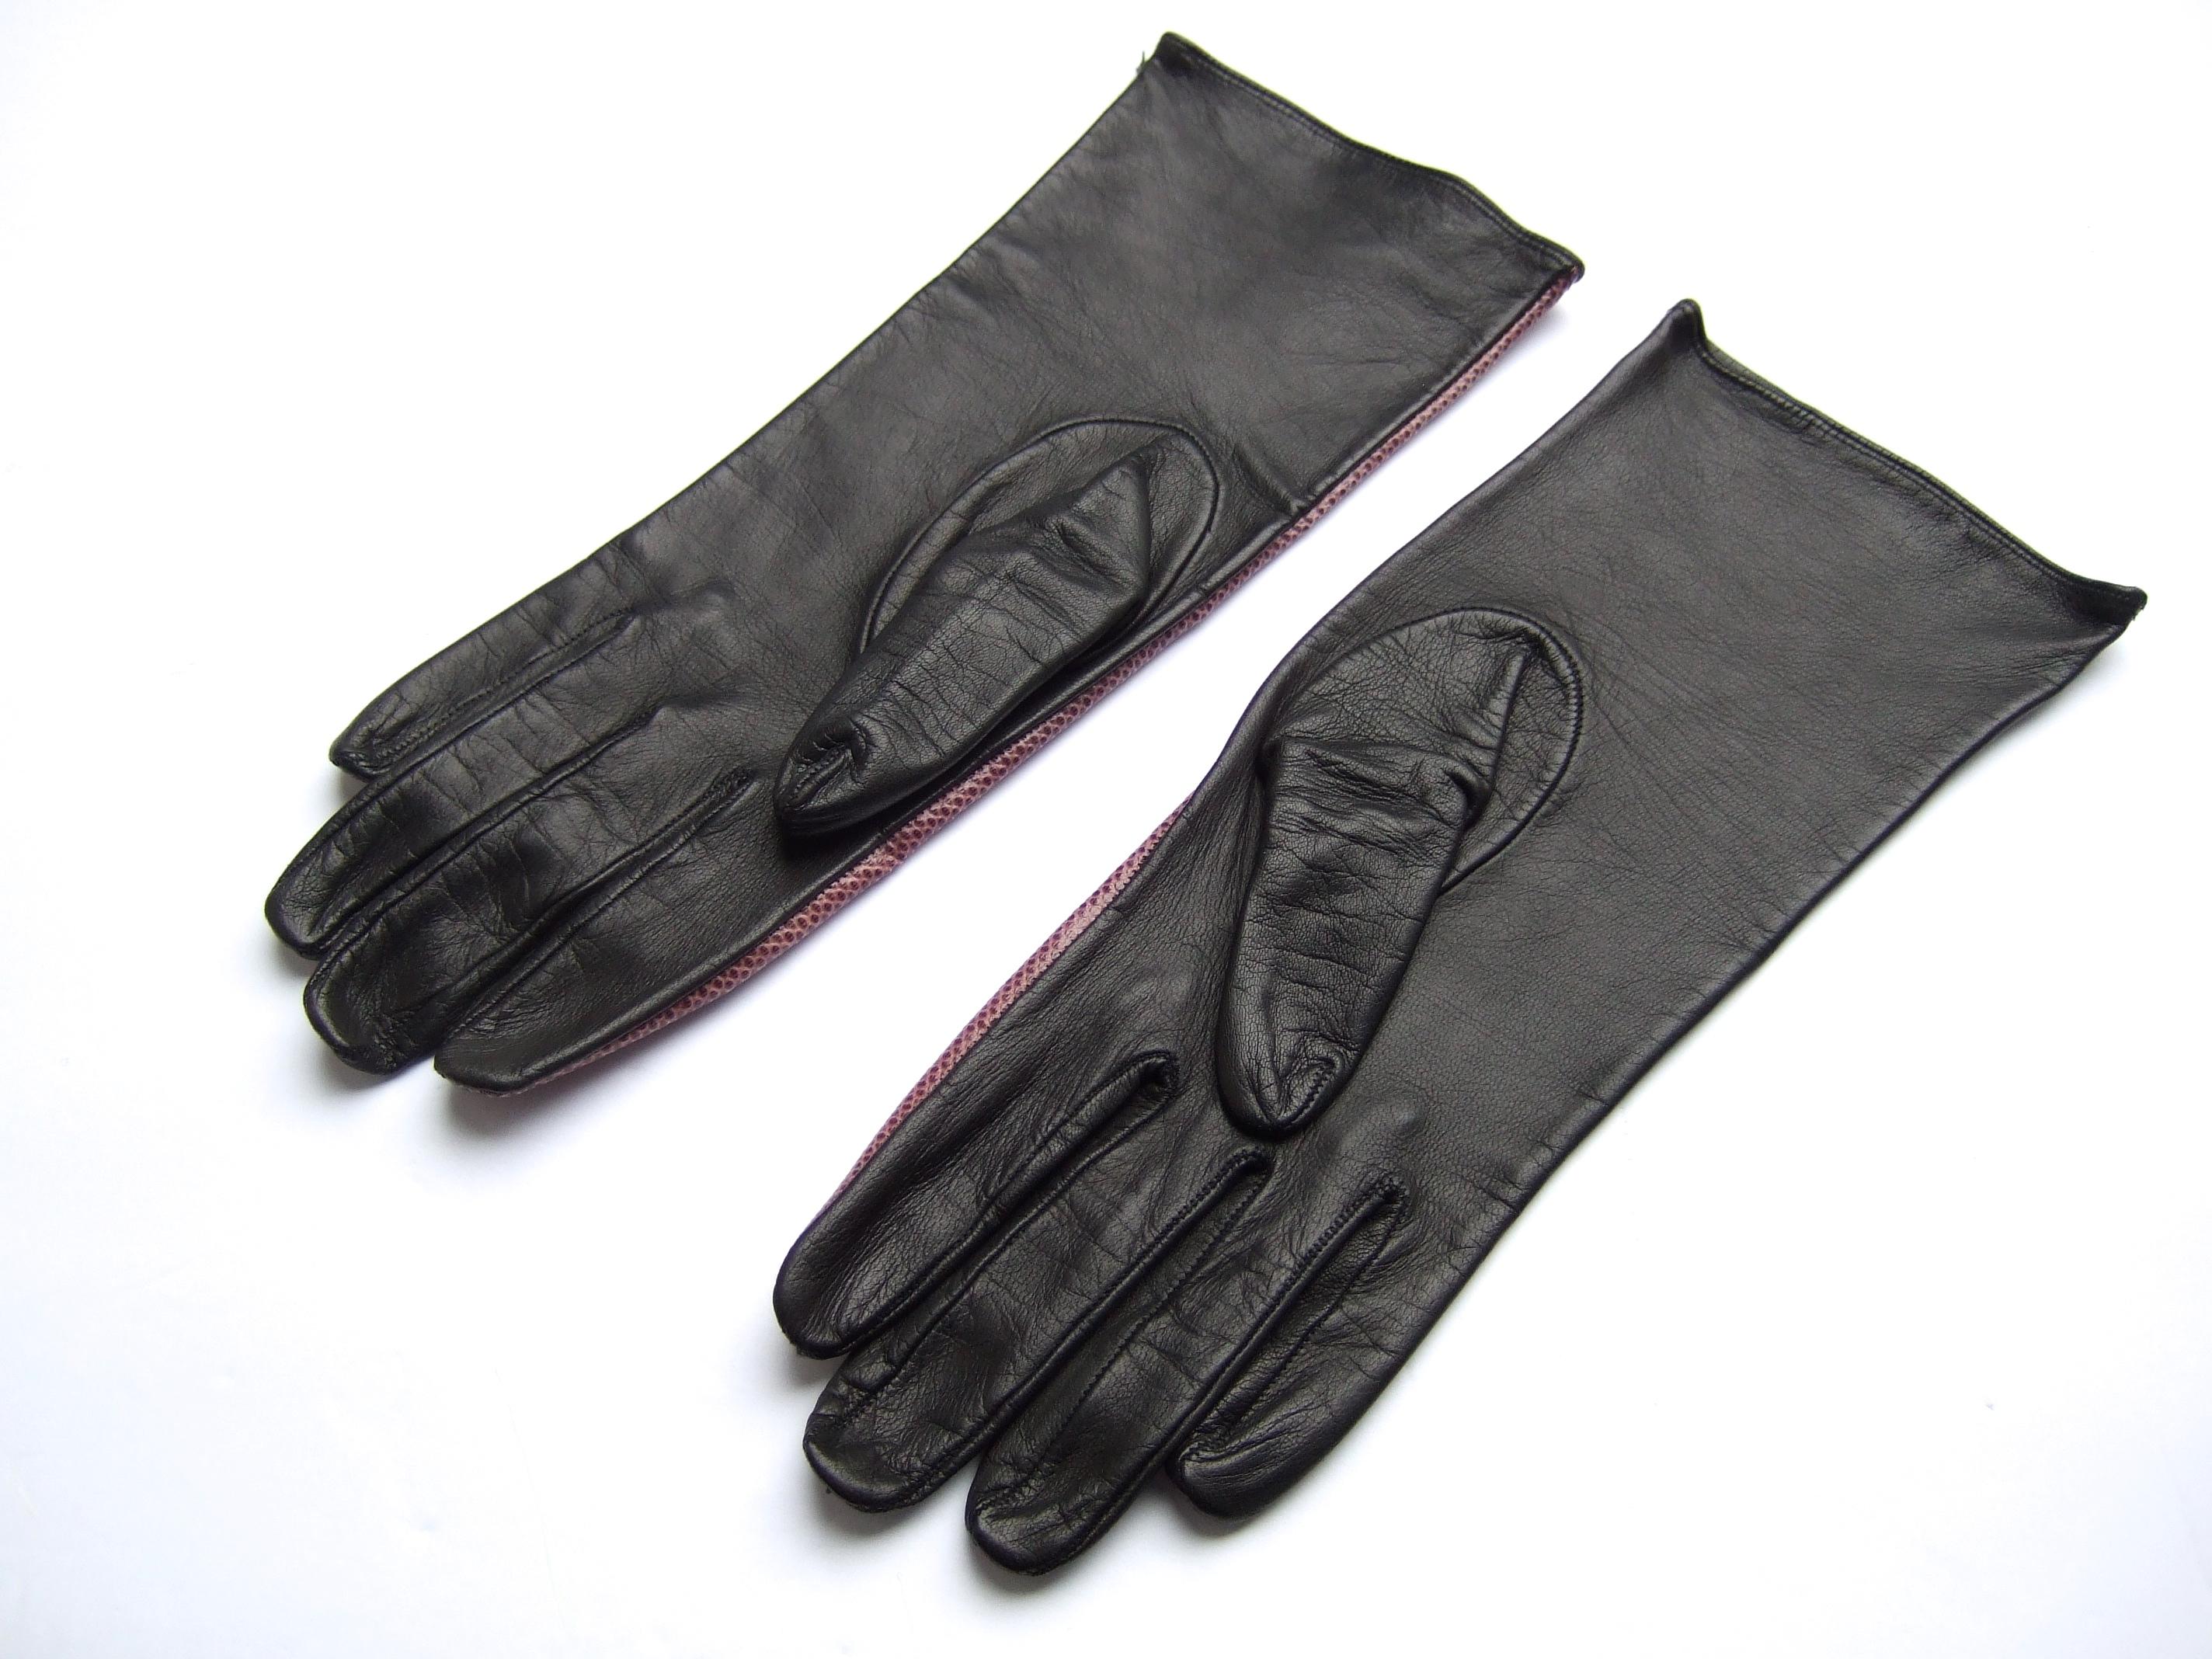 Yves Saint Laurent Chic Embossed Purple Leather Gloves Size 7 c 1980s For Sale 4